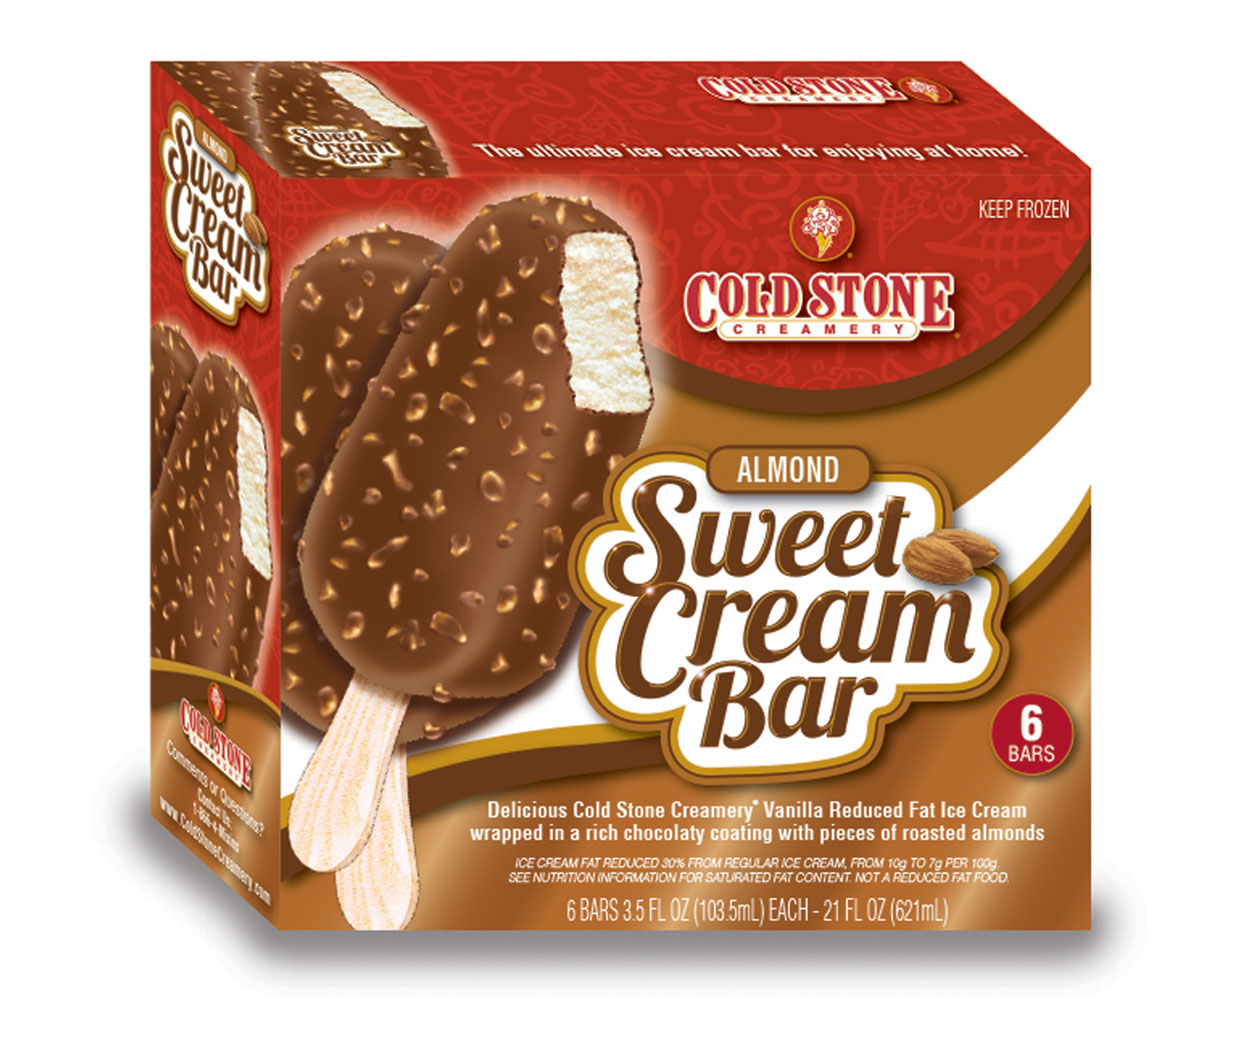 almond sweet cream bar 6 bars. delicious cold stone creamery vanilla reduced fat ice cream wrapped in a rich chocolaty coating with pieces of roasted almosts.